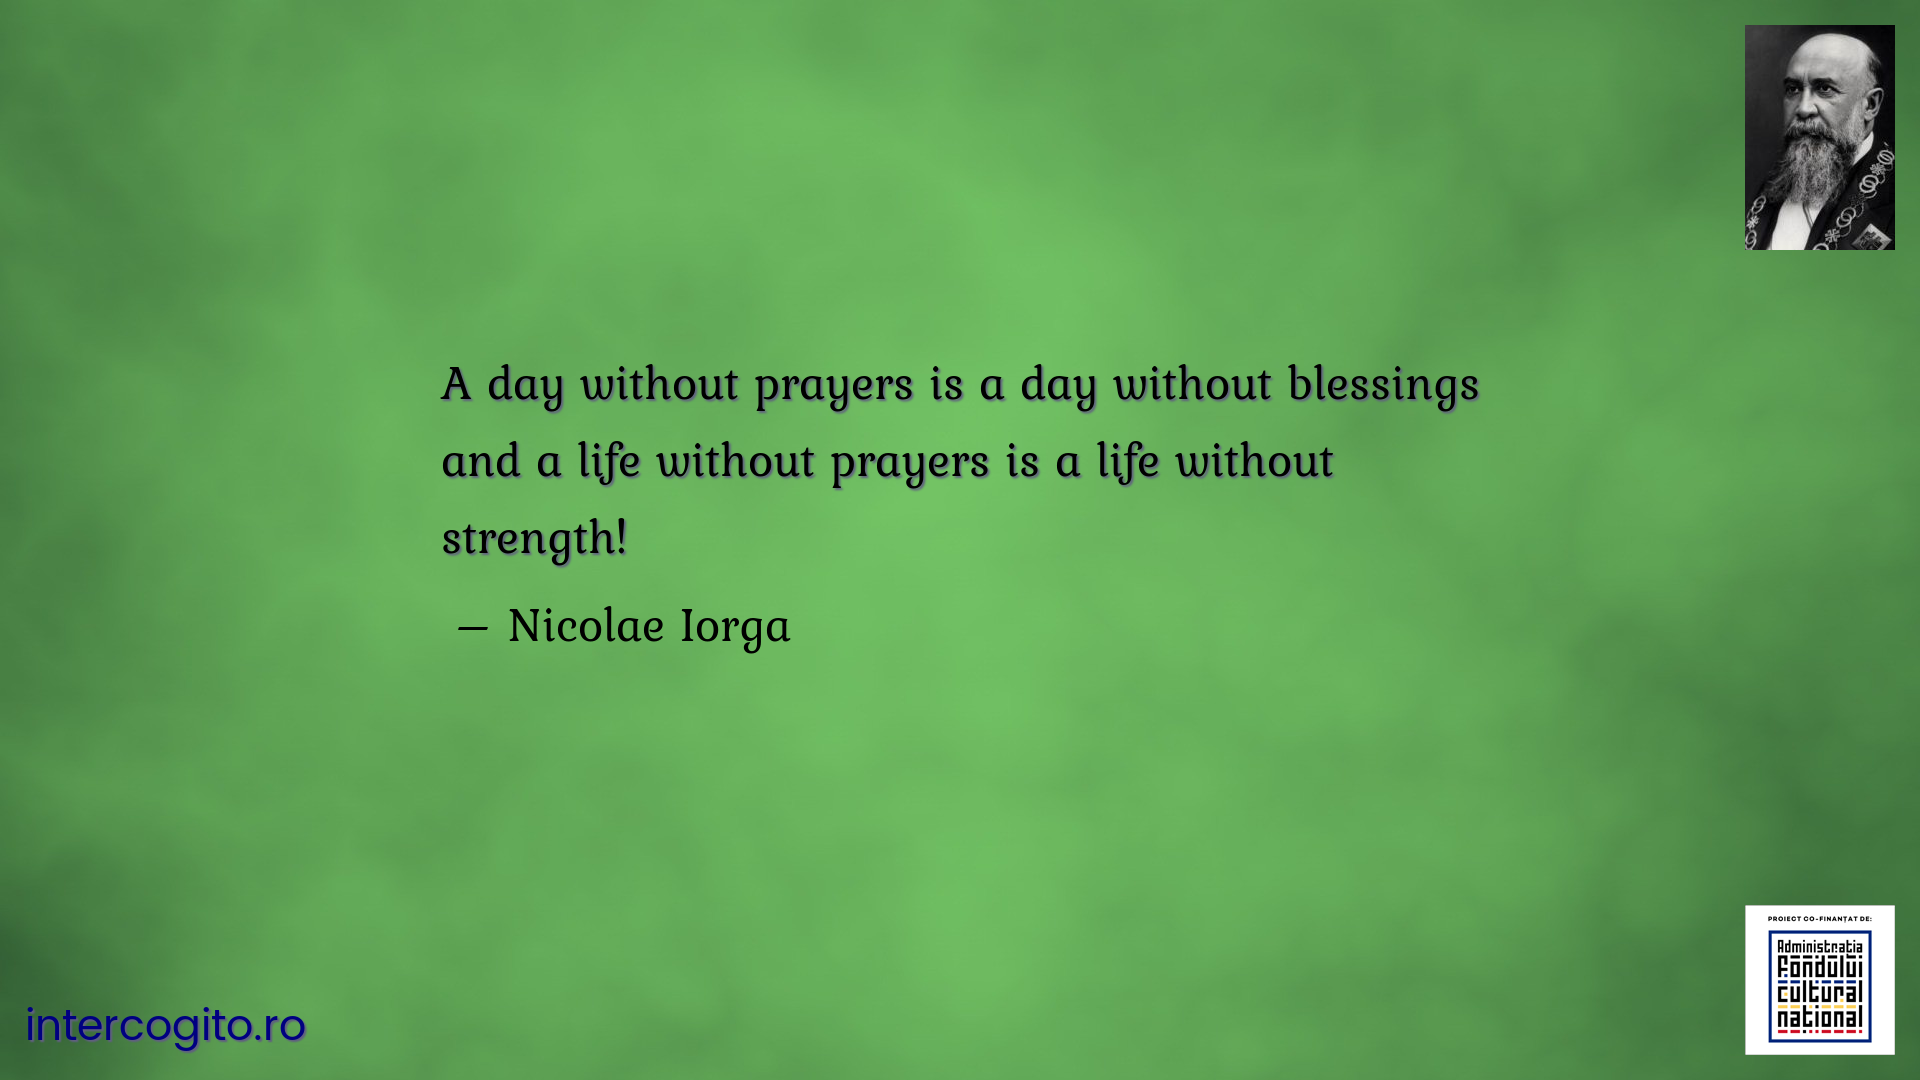 A day without prayers is a day without blessings and a life without prayers is a life without strength!